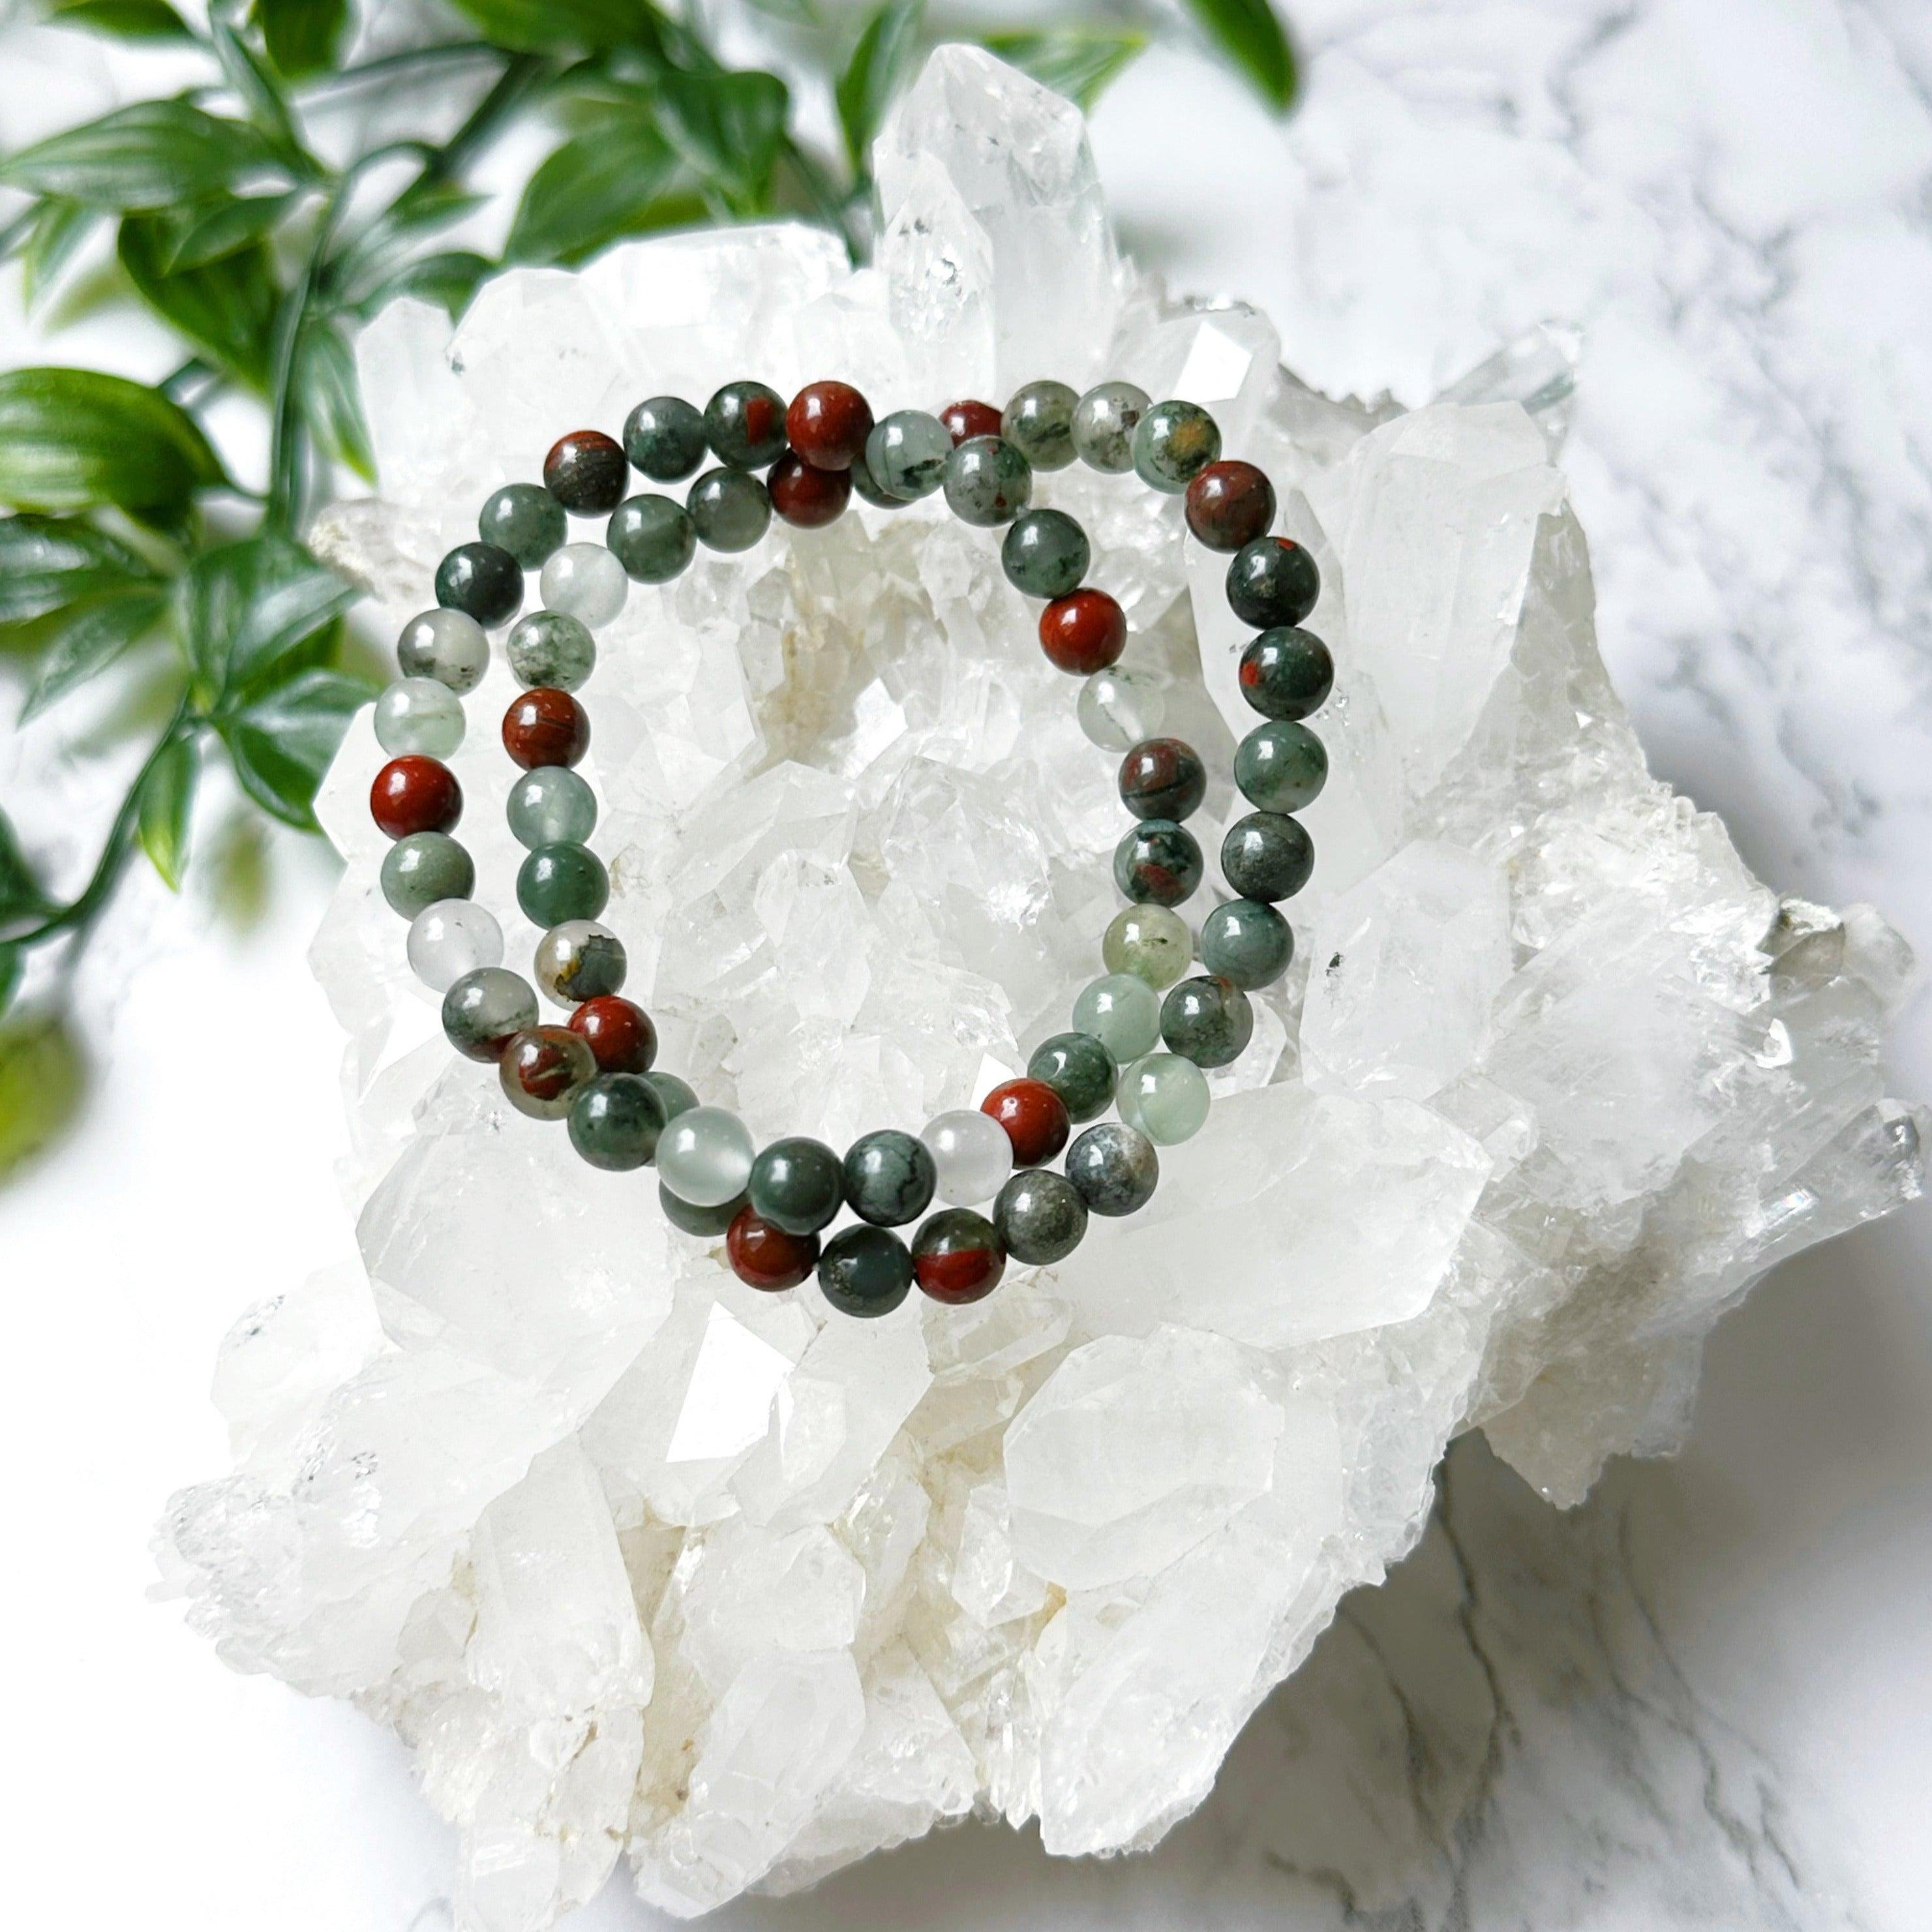 AFRICAN BLOODSTONE 6mm - HANDMADE CRYSTAL BRACELET - 6mm, African bloodstone, Aries, aries stack, bracelet, crystal bracelet, earth, emotional support, Friday the 13th, handmade bracelet, jewelry, libra, libra stack, market bracelet, mixed colors, pisces, pisces stack, protection gift bundle, recently added, scorpio stack, Wearable - The Mineral Maven